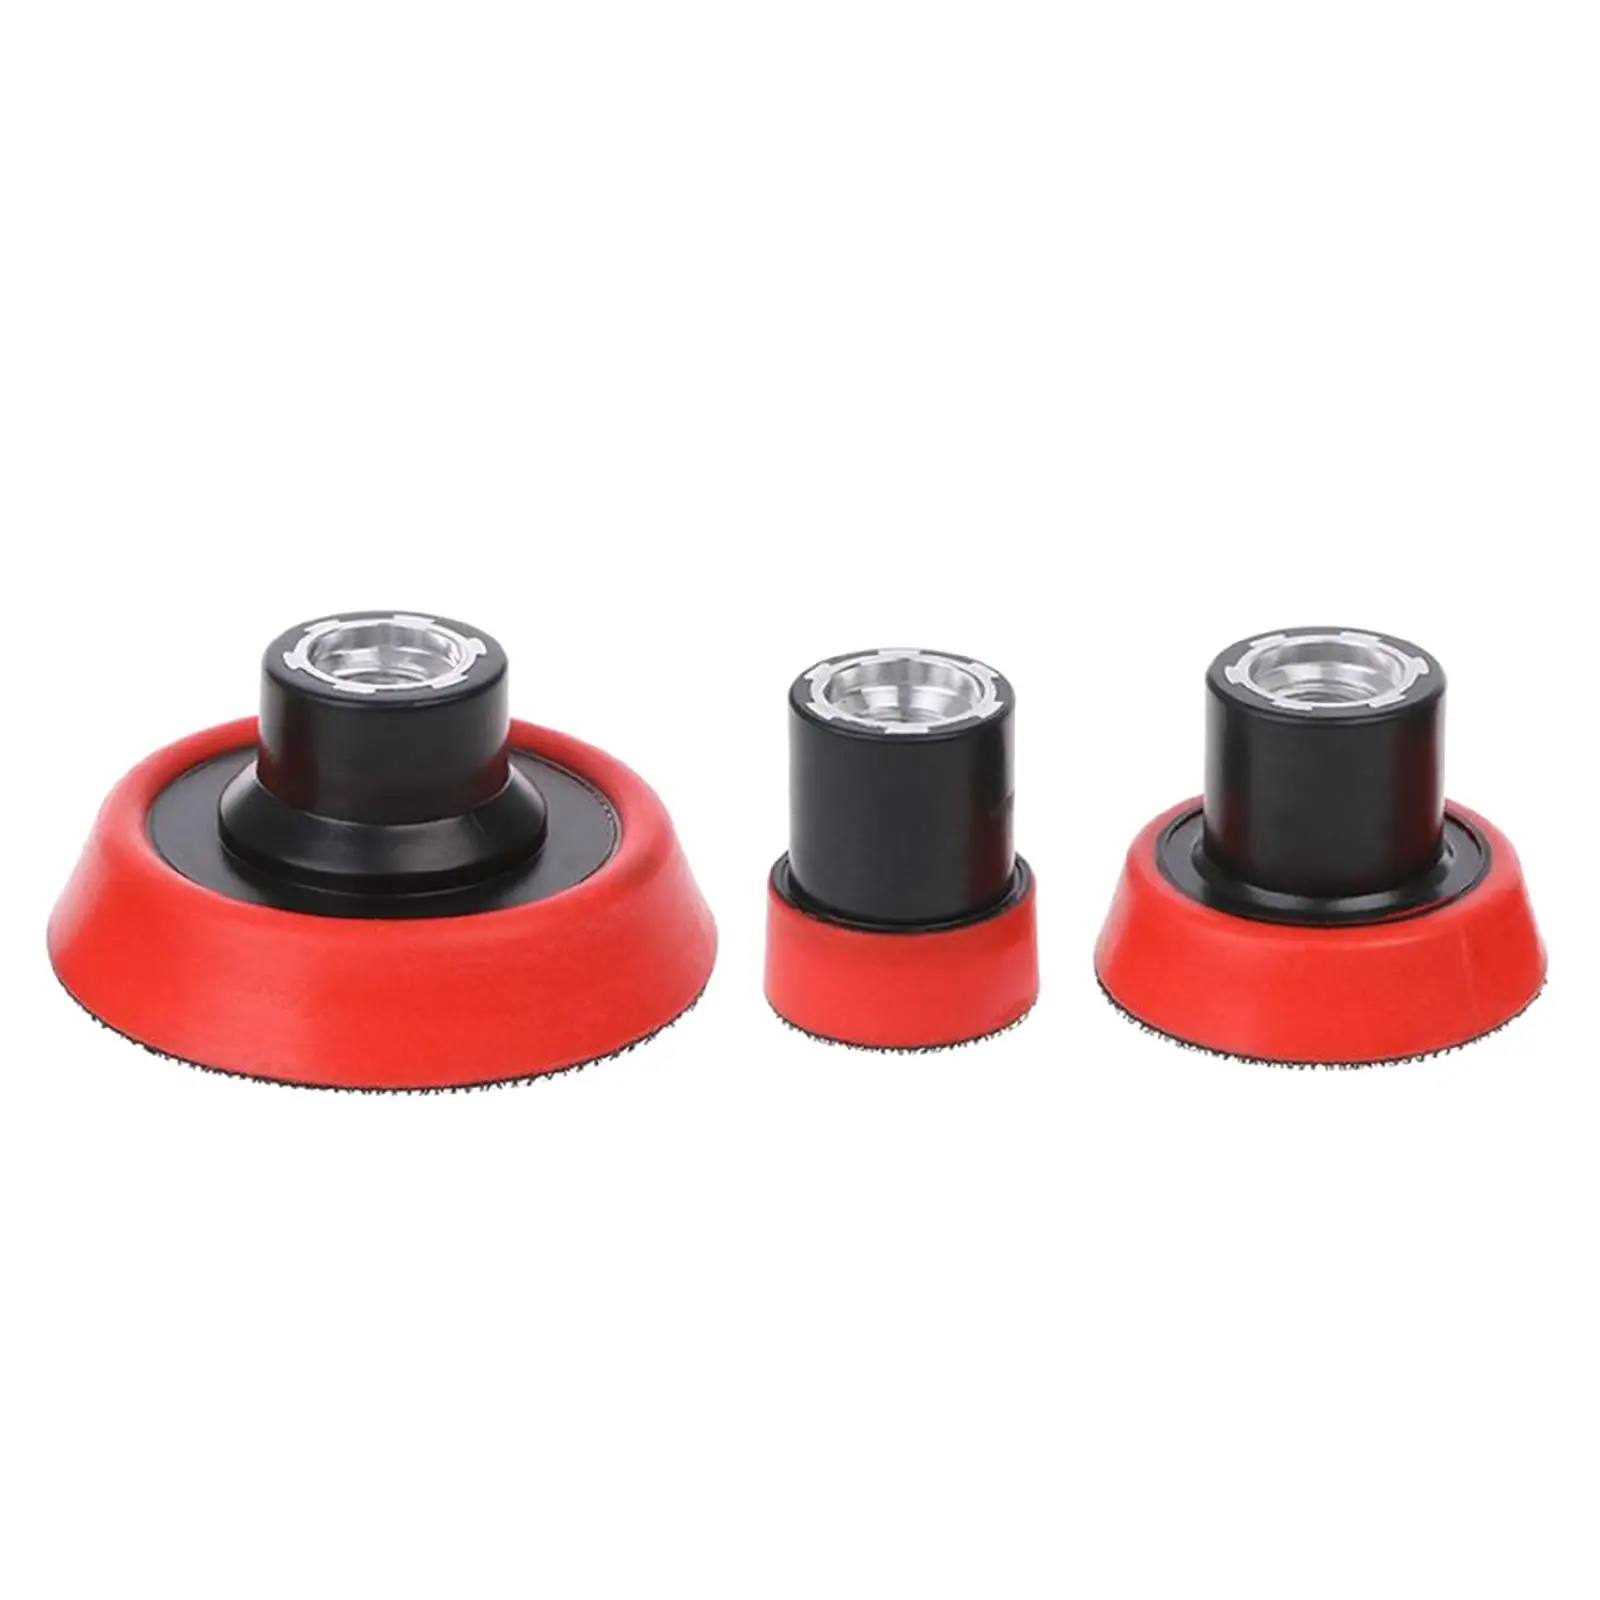 3x M14 Accessories Set Backer Polisher Backing   for Car Wash Detailing